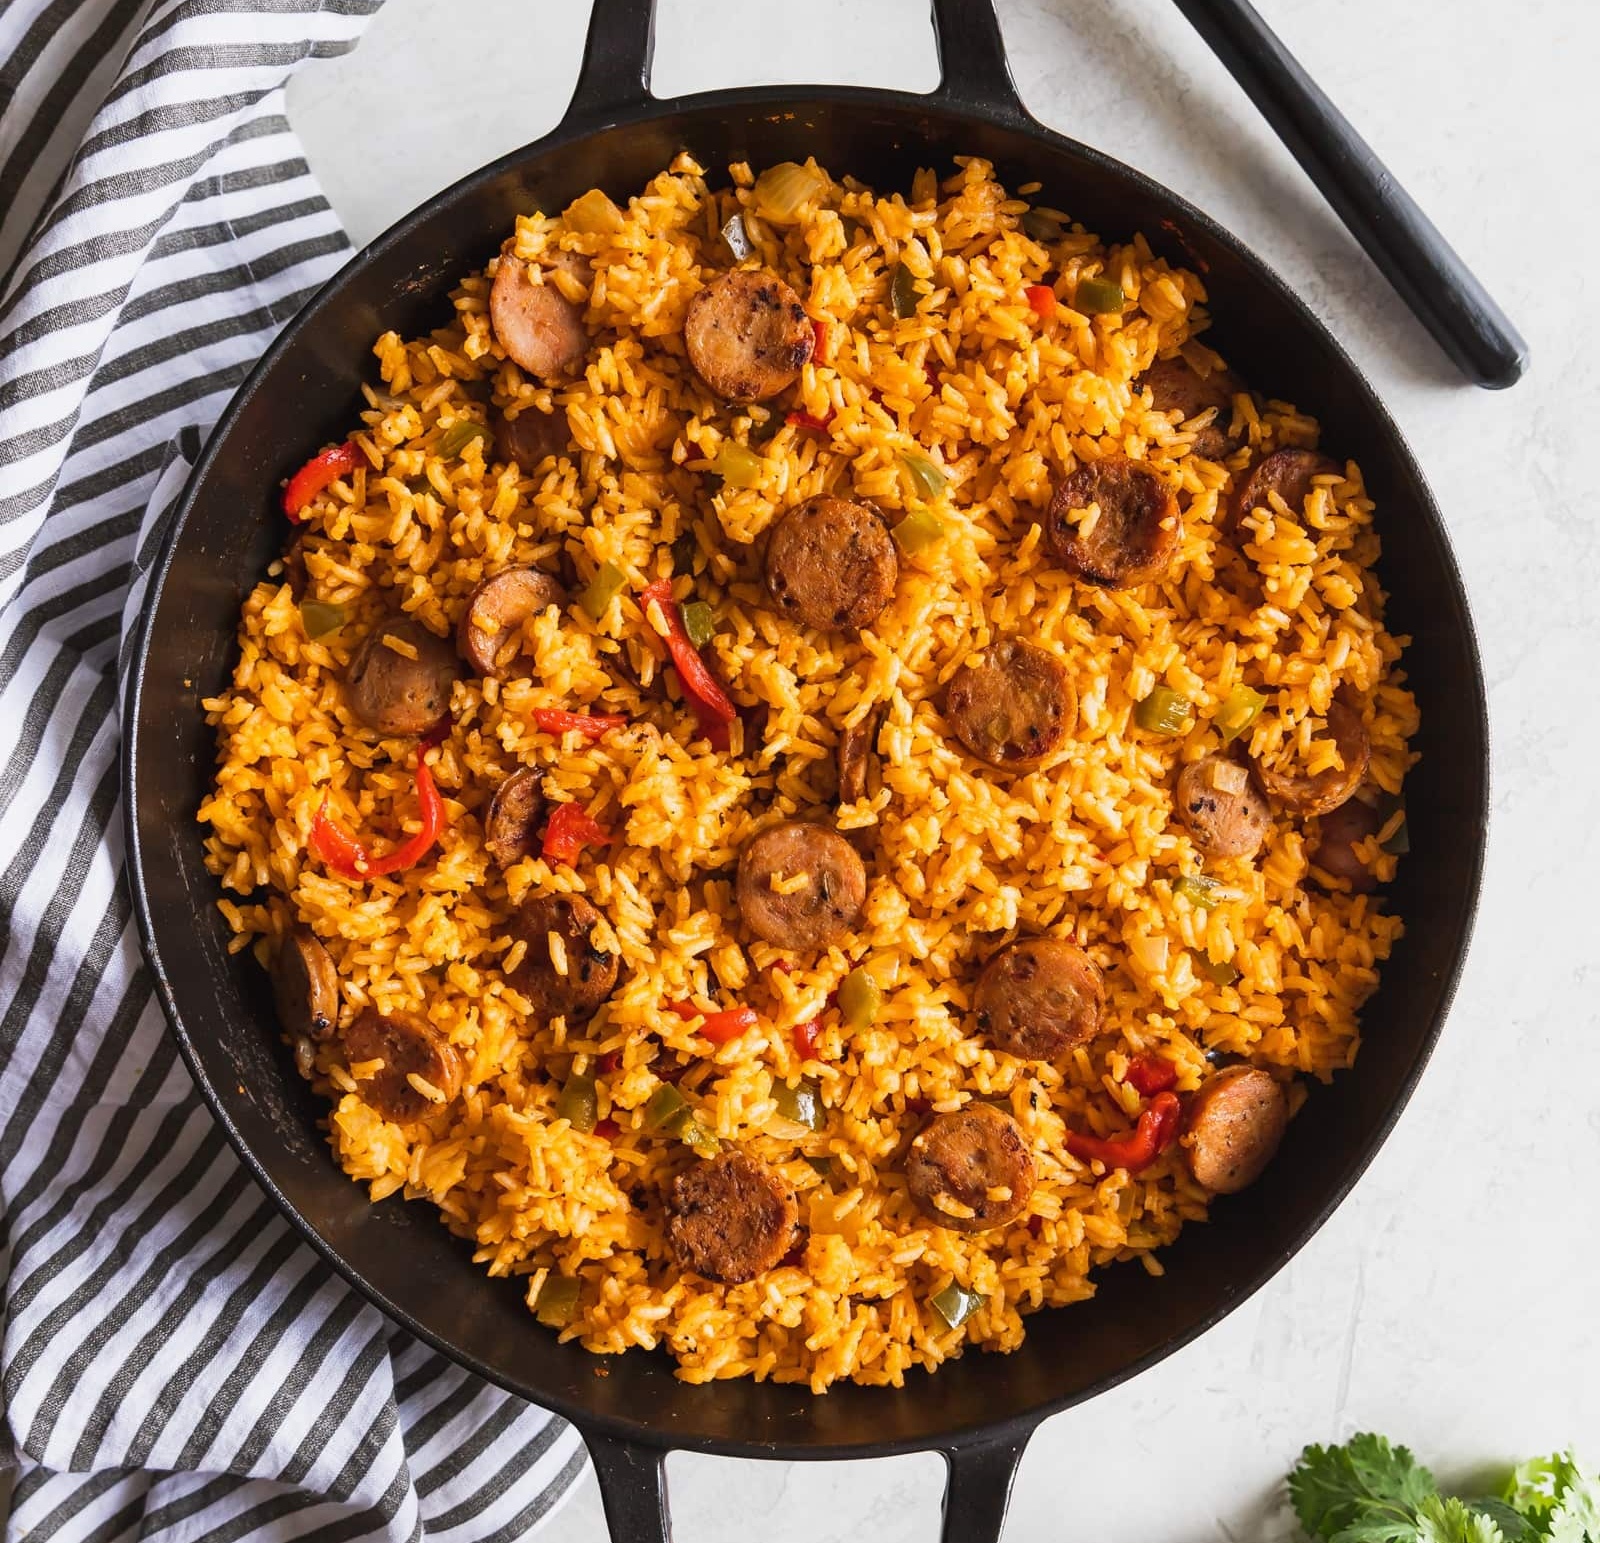 What is Arroz con Salchichas and How do you Make it